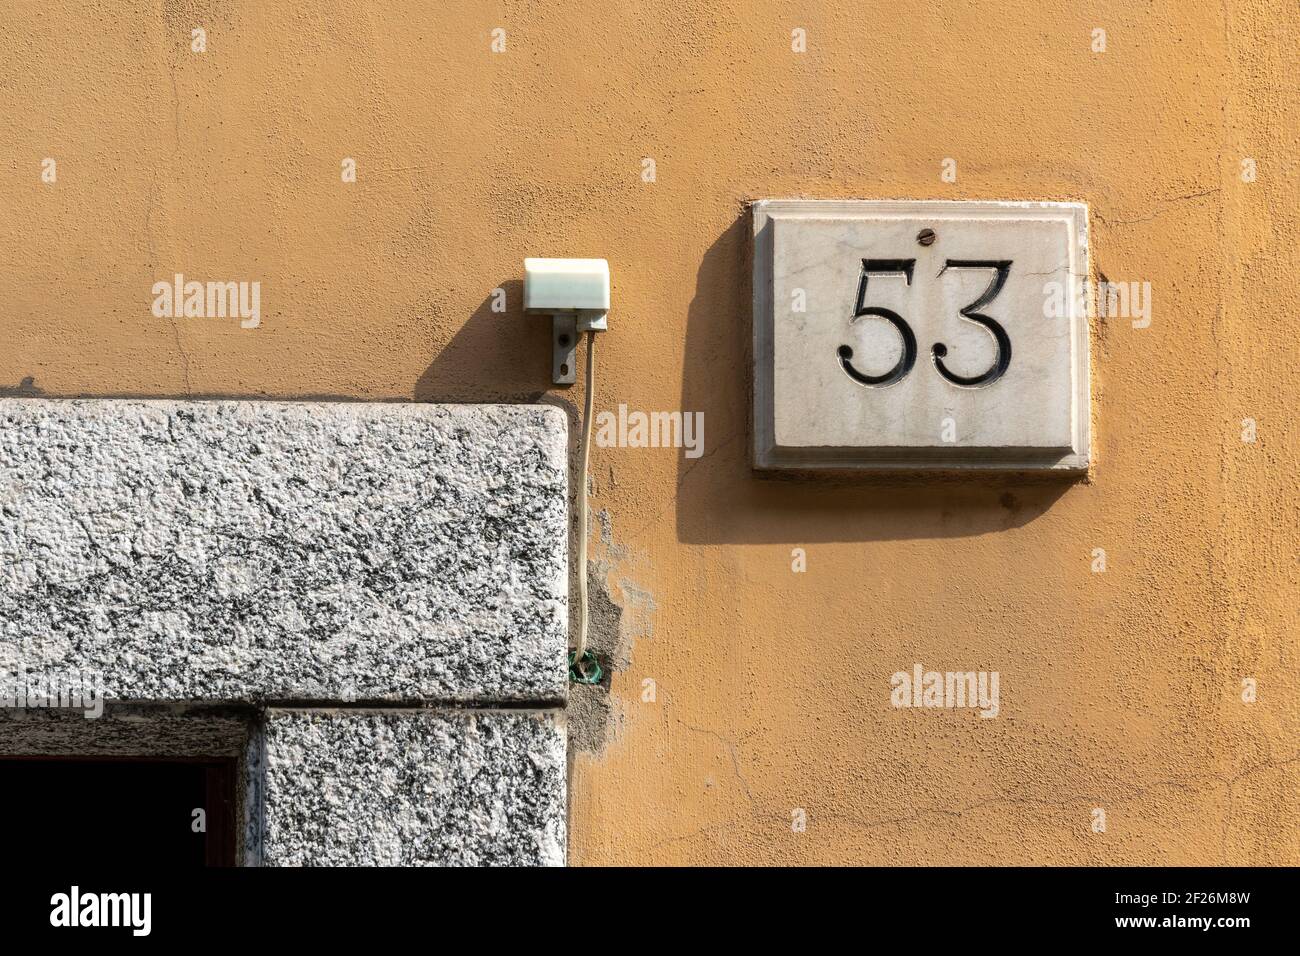 53 ancient house number, concept number Stock Photo